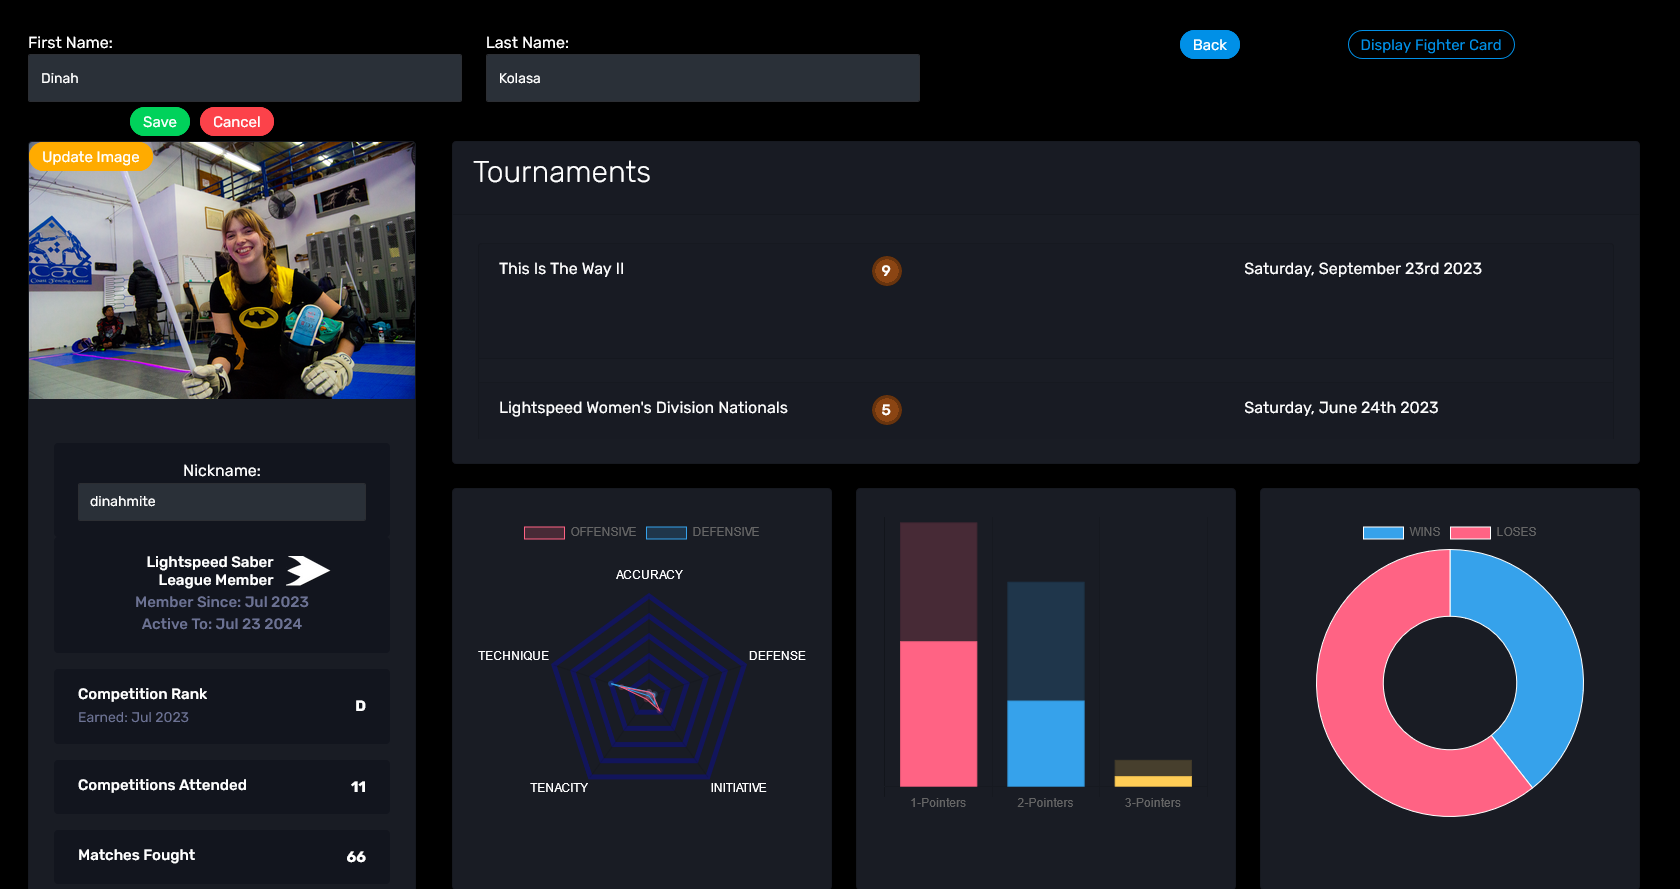  Personal profile pages include access to all tournament stats, like previous tournaments and win/loss ratios.  